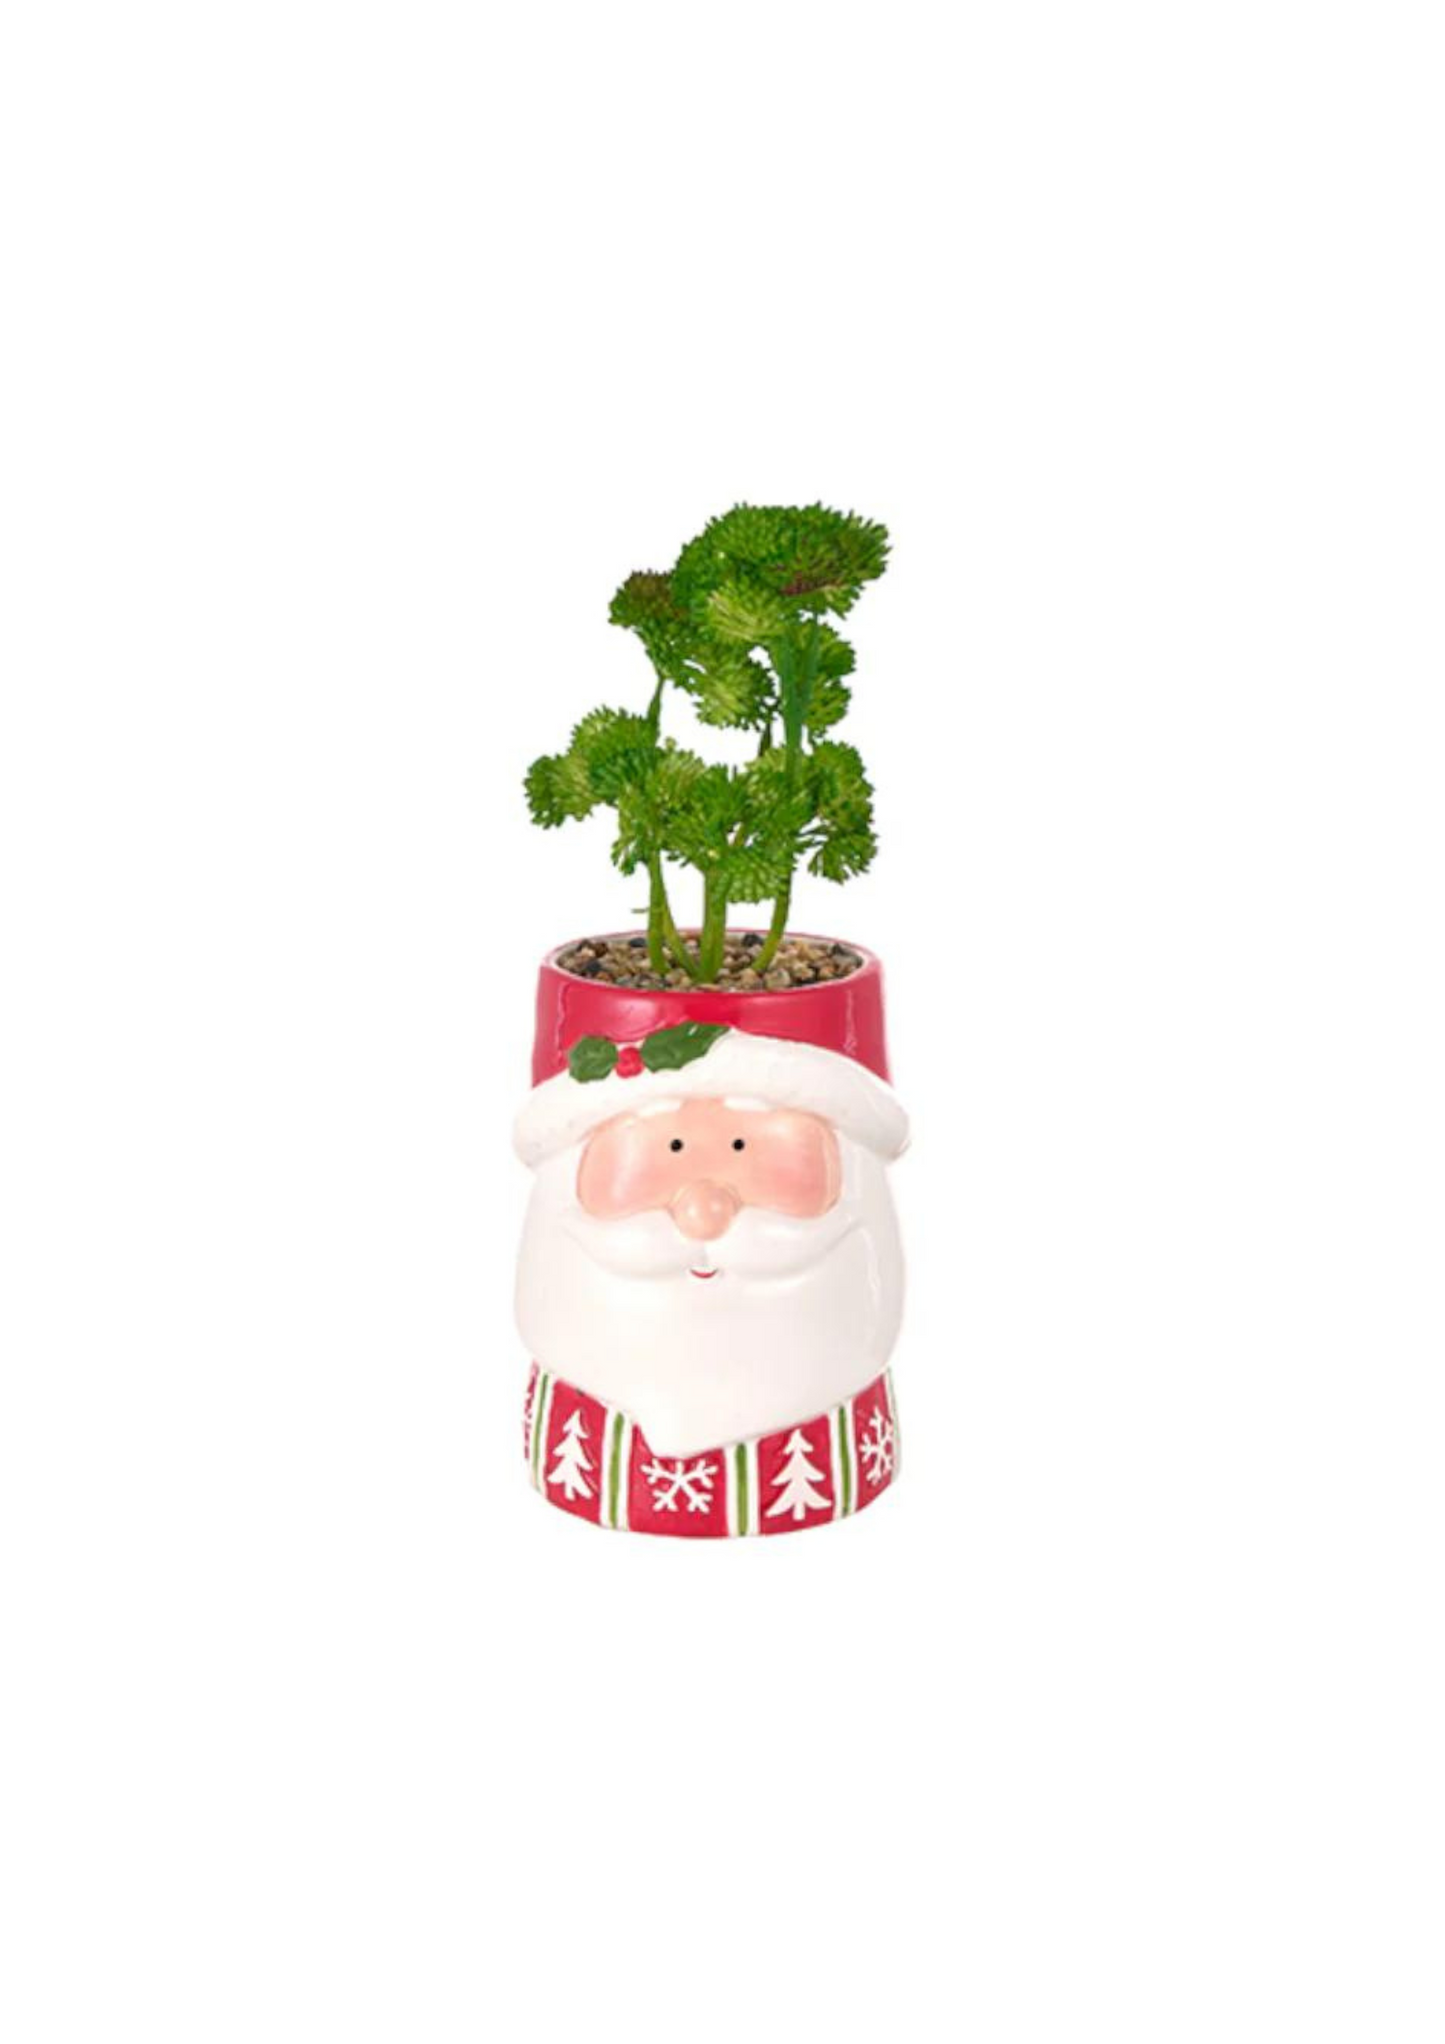 Pot with seedling - Santa Claus with mistletoe